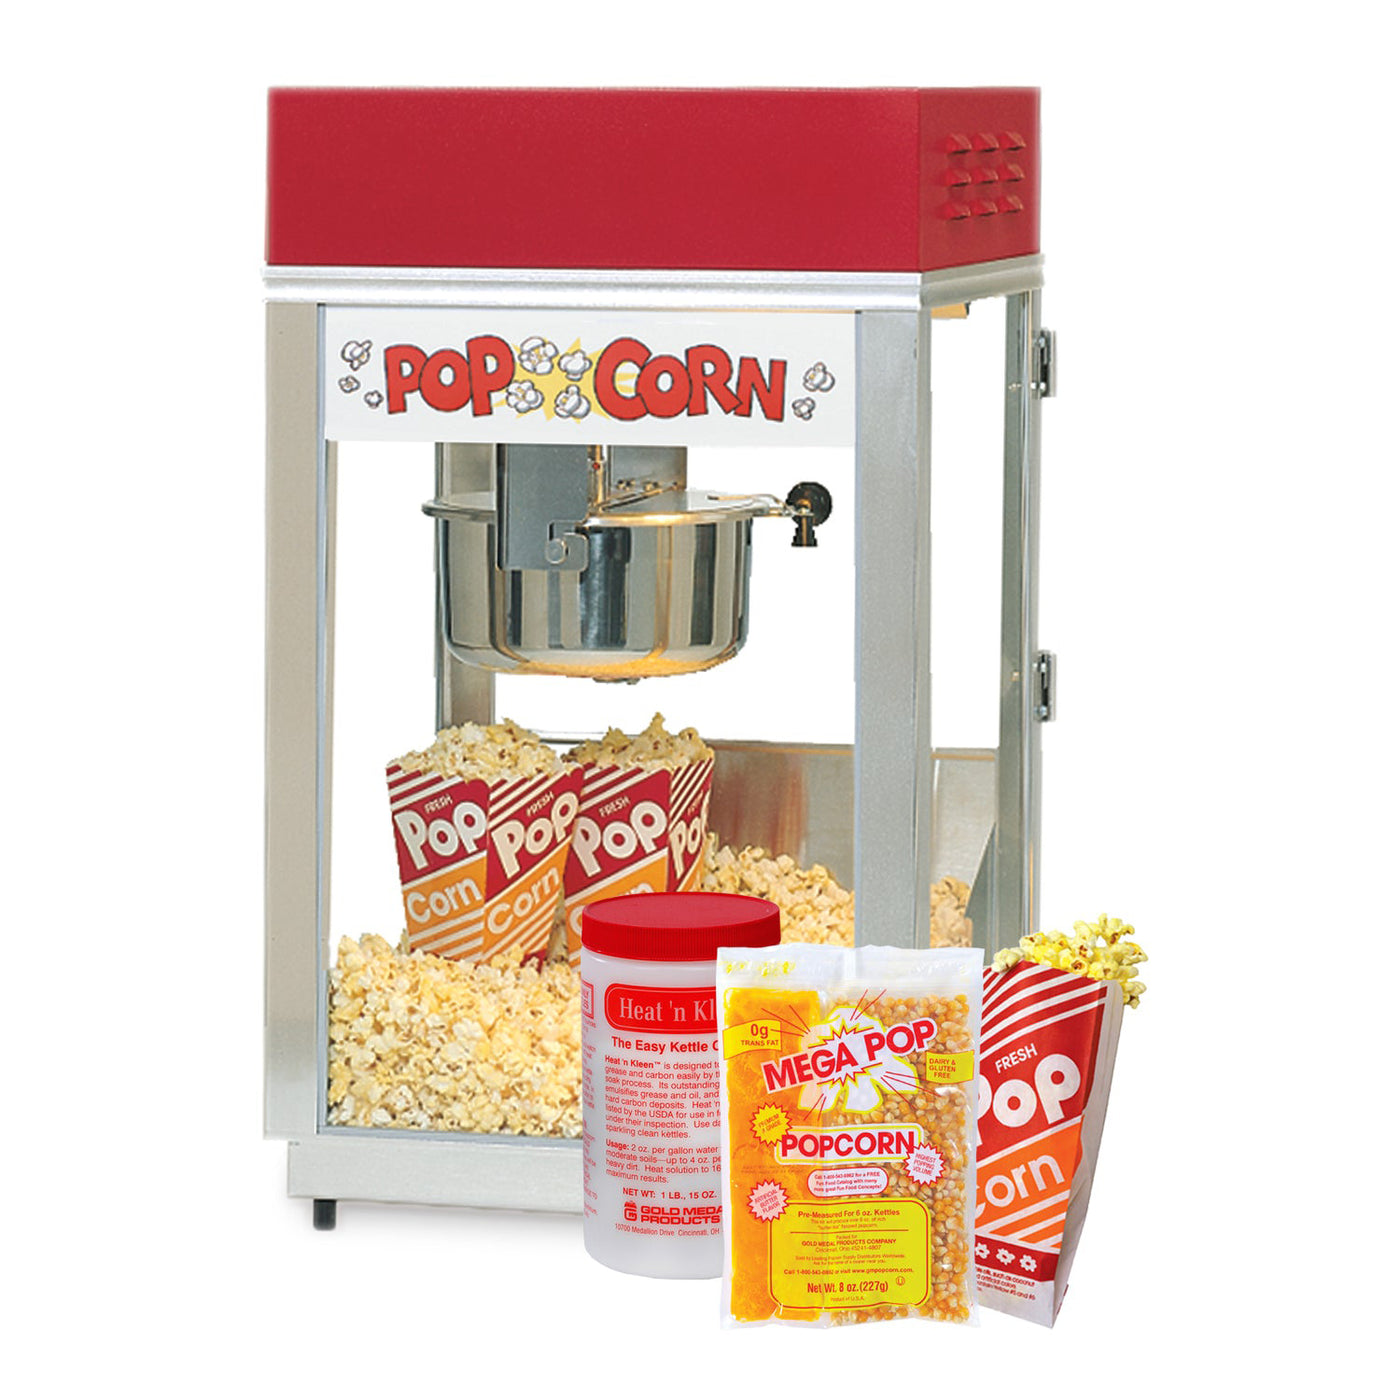 Popcorn Machines and Accessories, Product categories